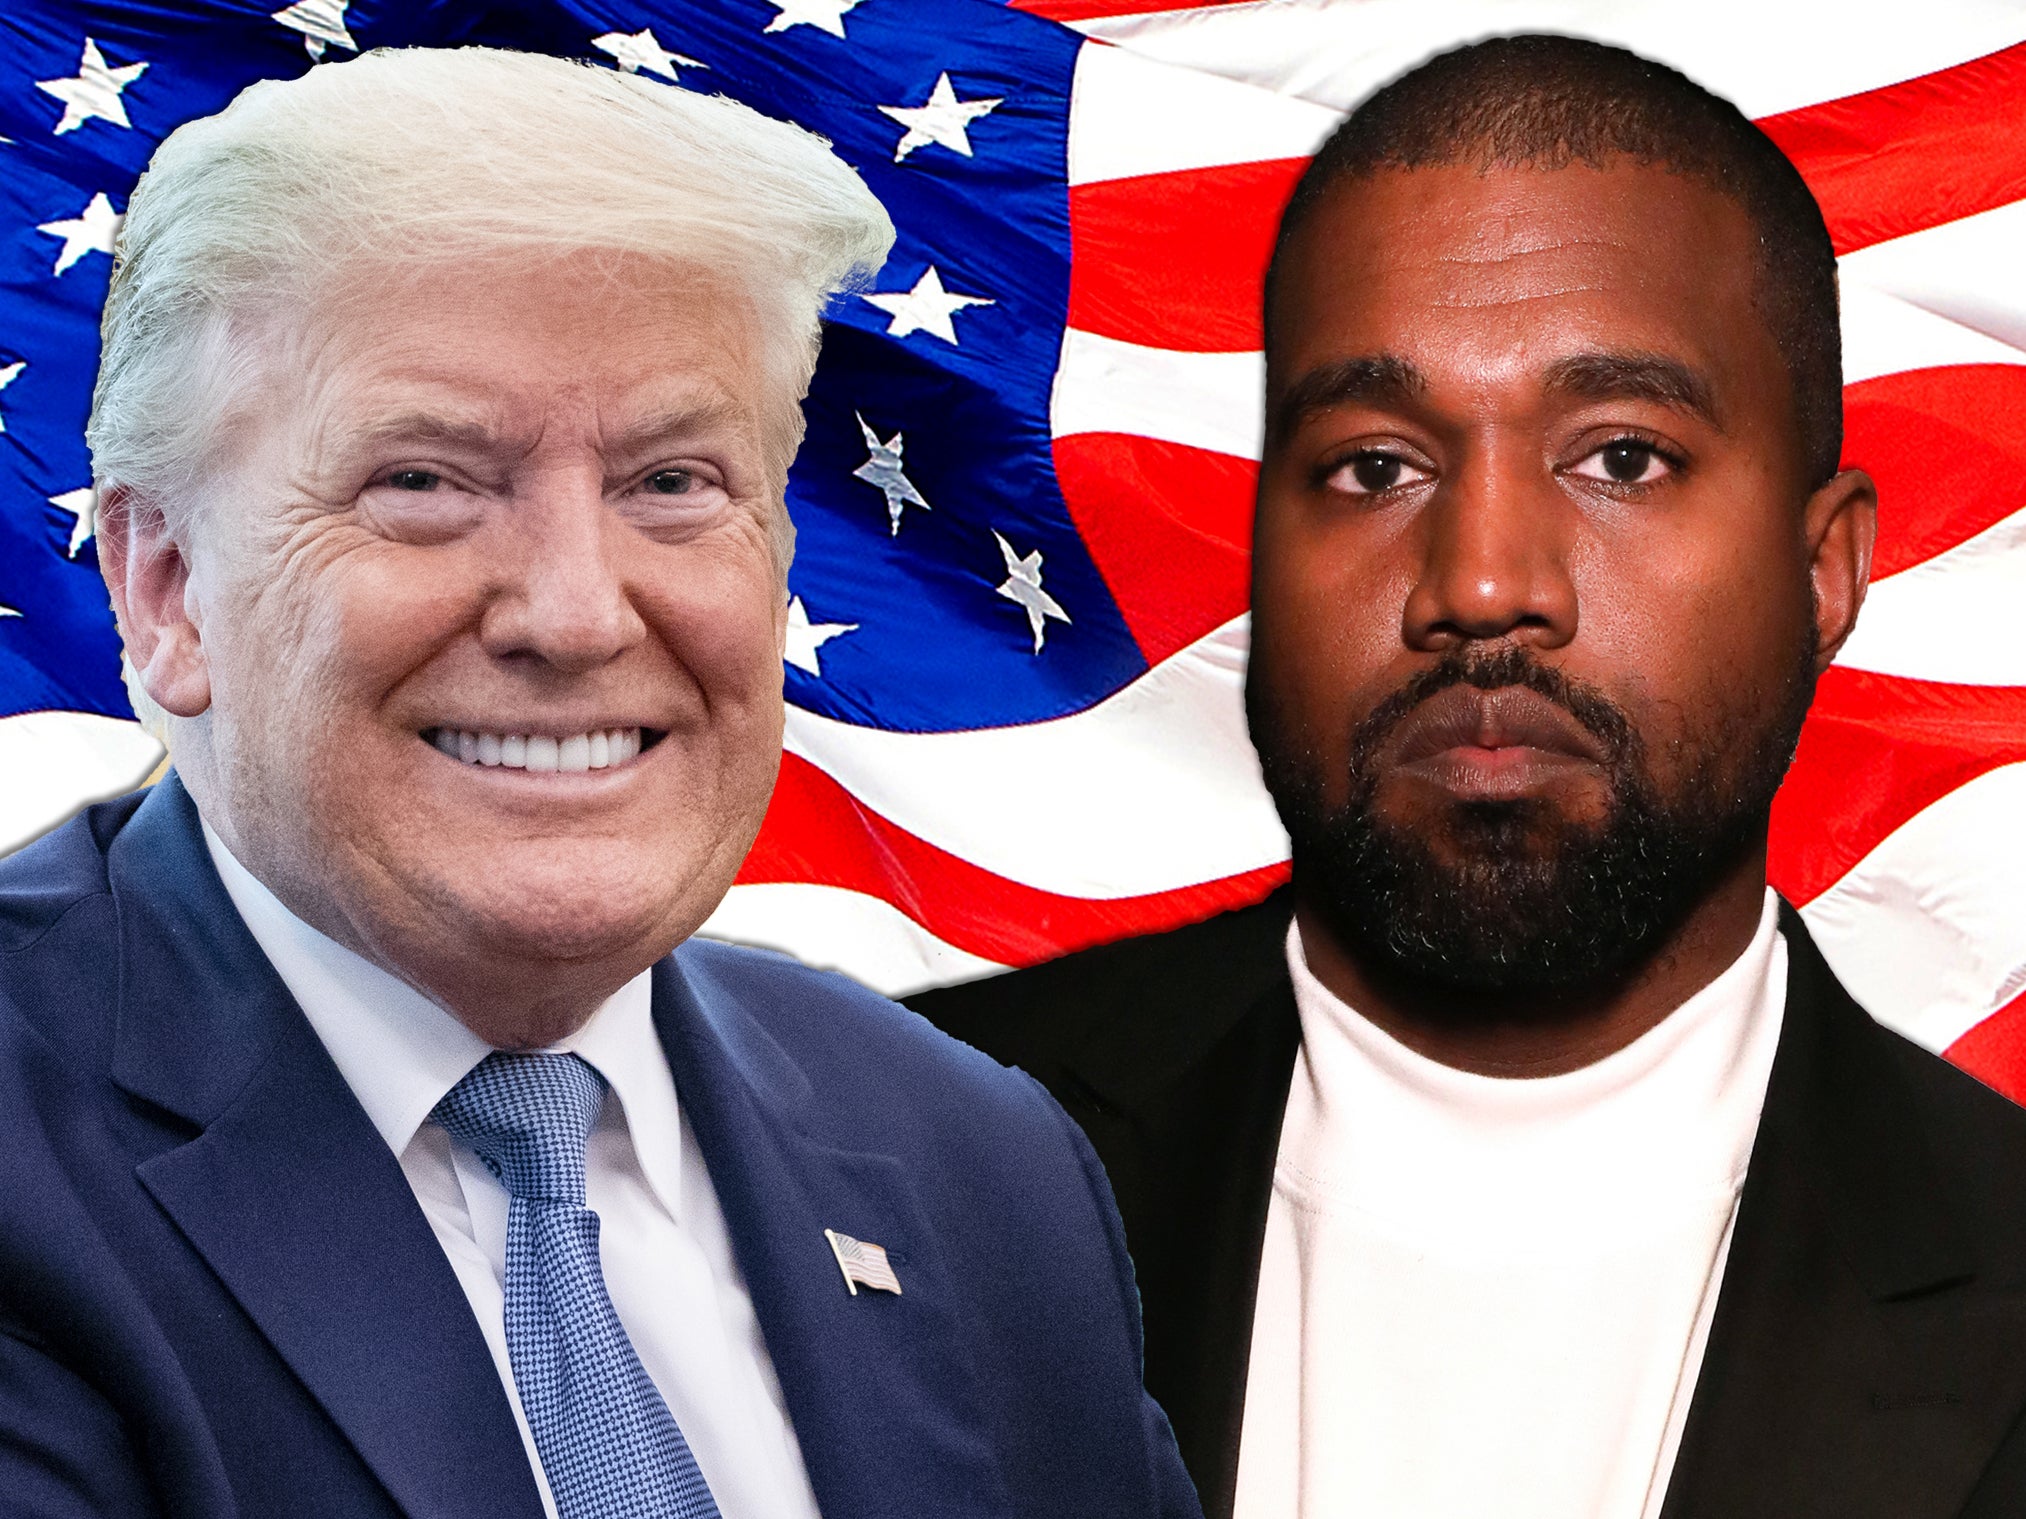 West's music changed my life, and his alliance with Trump was a betrayal